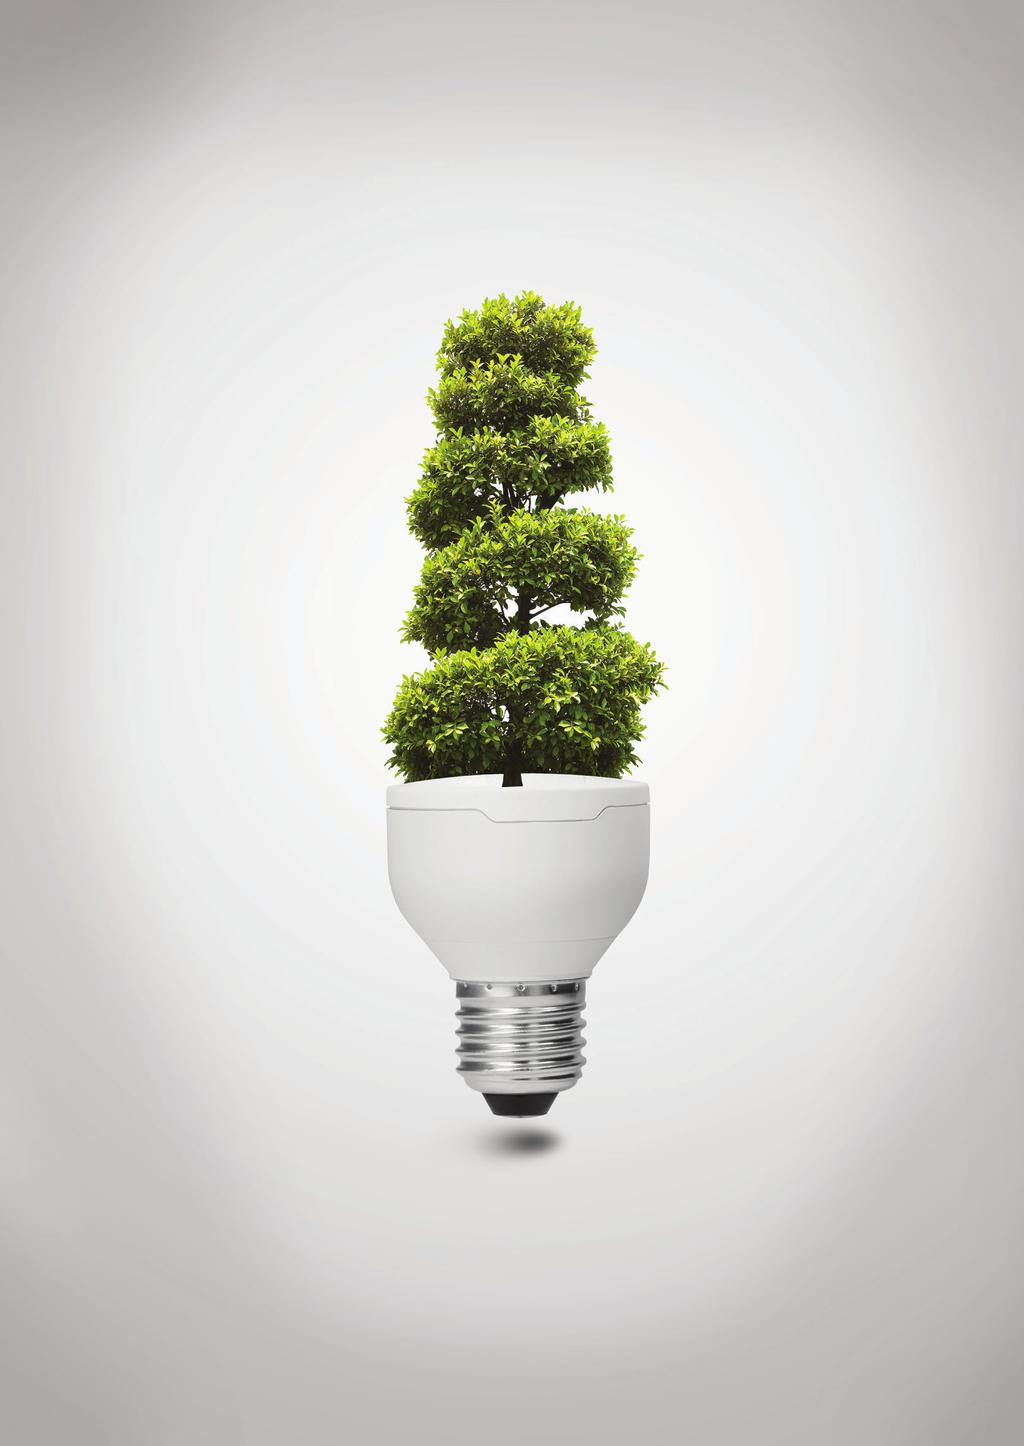 Green growth cycle: energy efficiency in support of